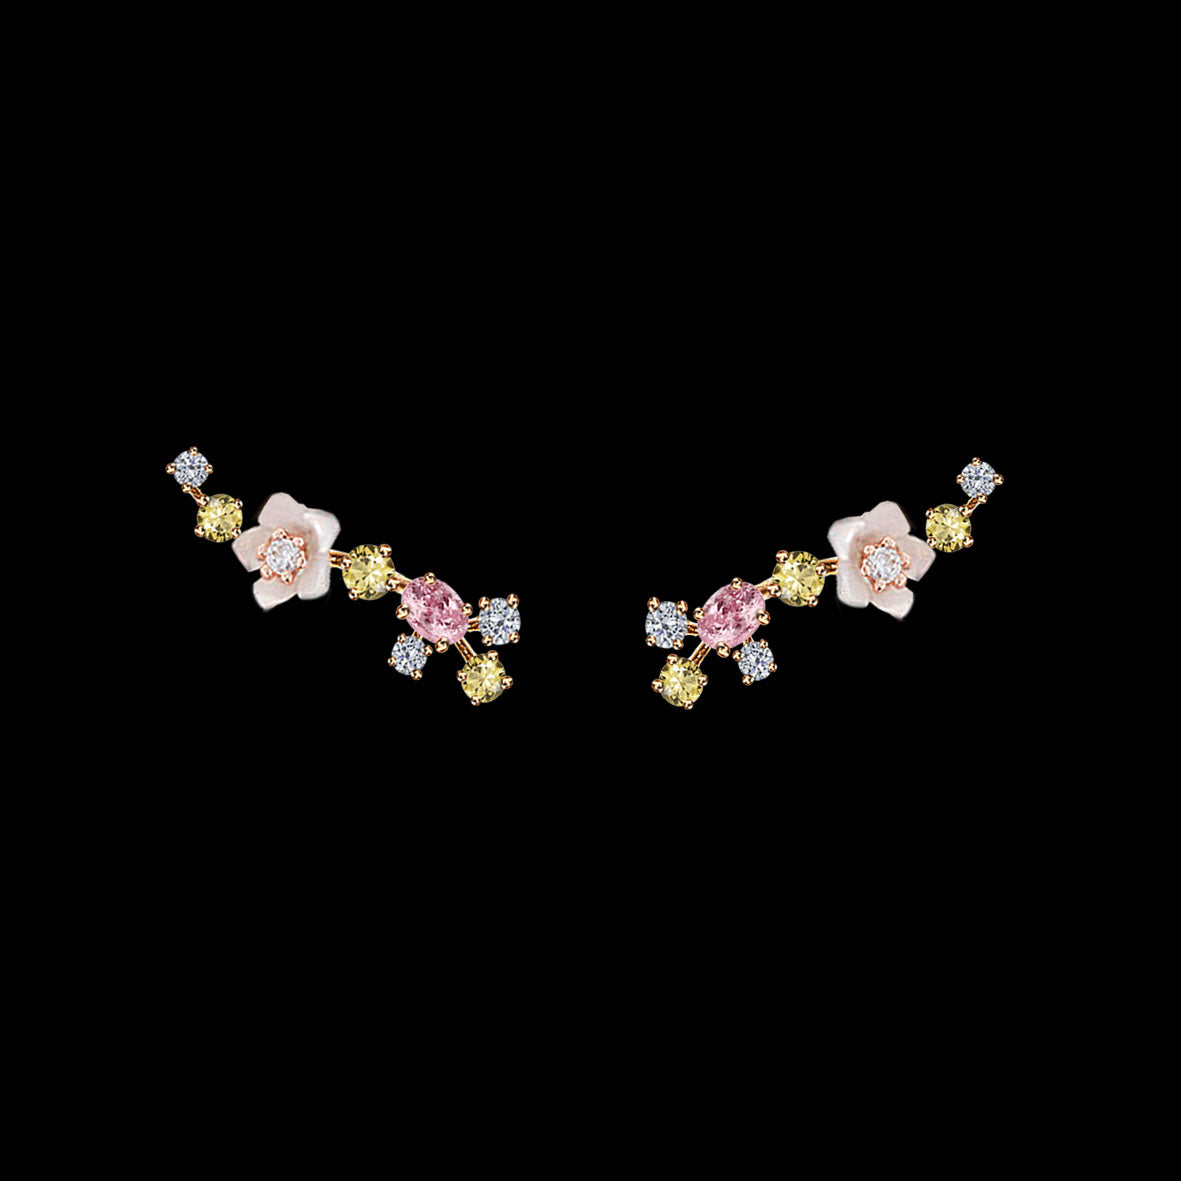 Rose Floral Ear Climbers, Earring, Anabela Chan Joaillerie - Fine jewelry with laboratory grown and created gemstones hand-crafted in the United Kingdom. Anabela Chan Joaillerie is the first fine jewellery brand in the world to champion laboratory-grown and created gemstones with high jewellery design, artisanal craftsmanship and a focus on ethical and sustainable innovations.